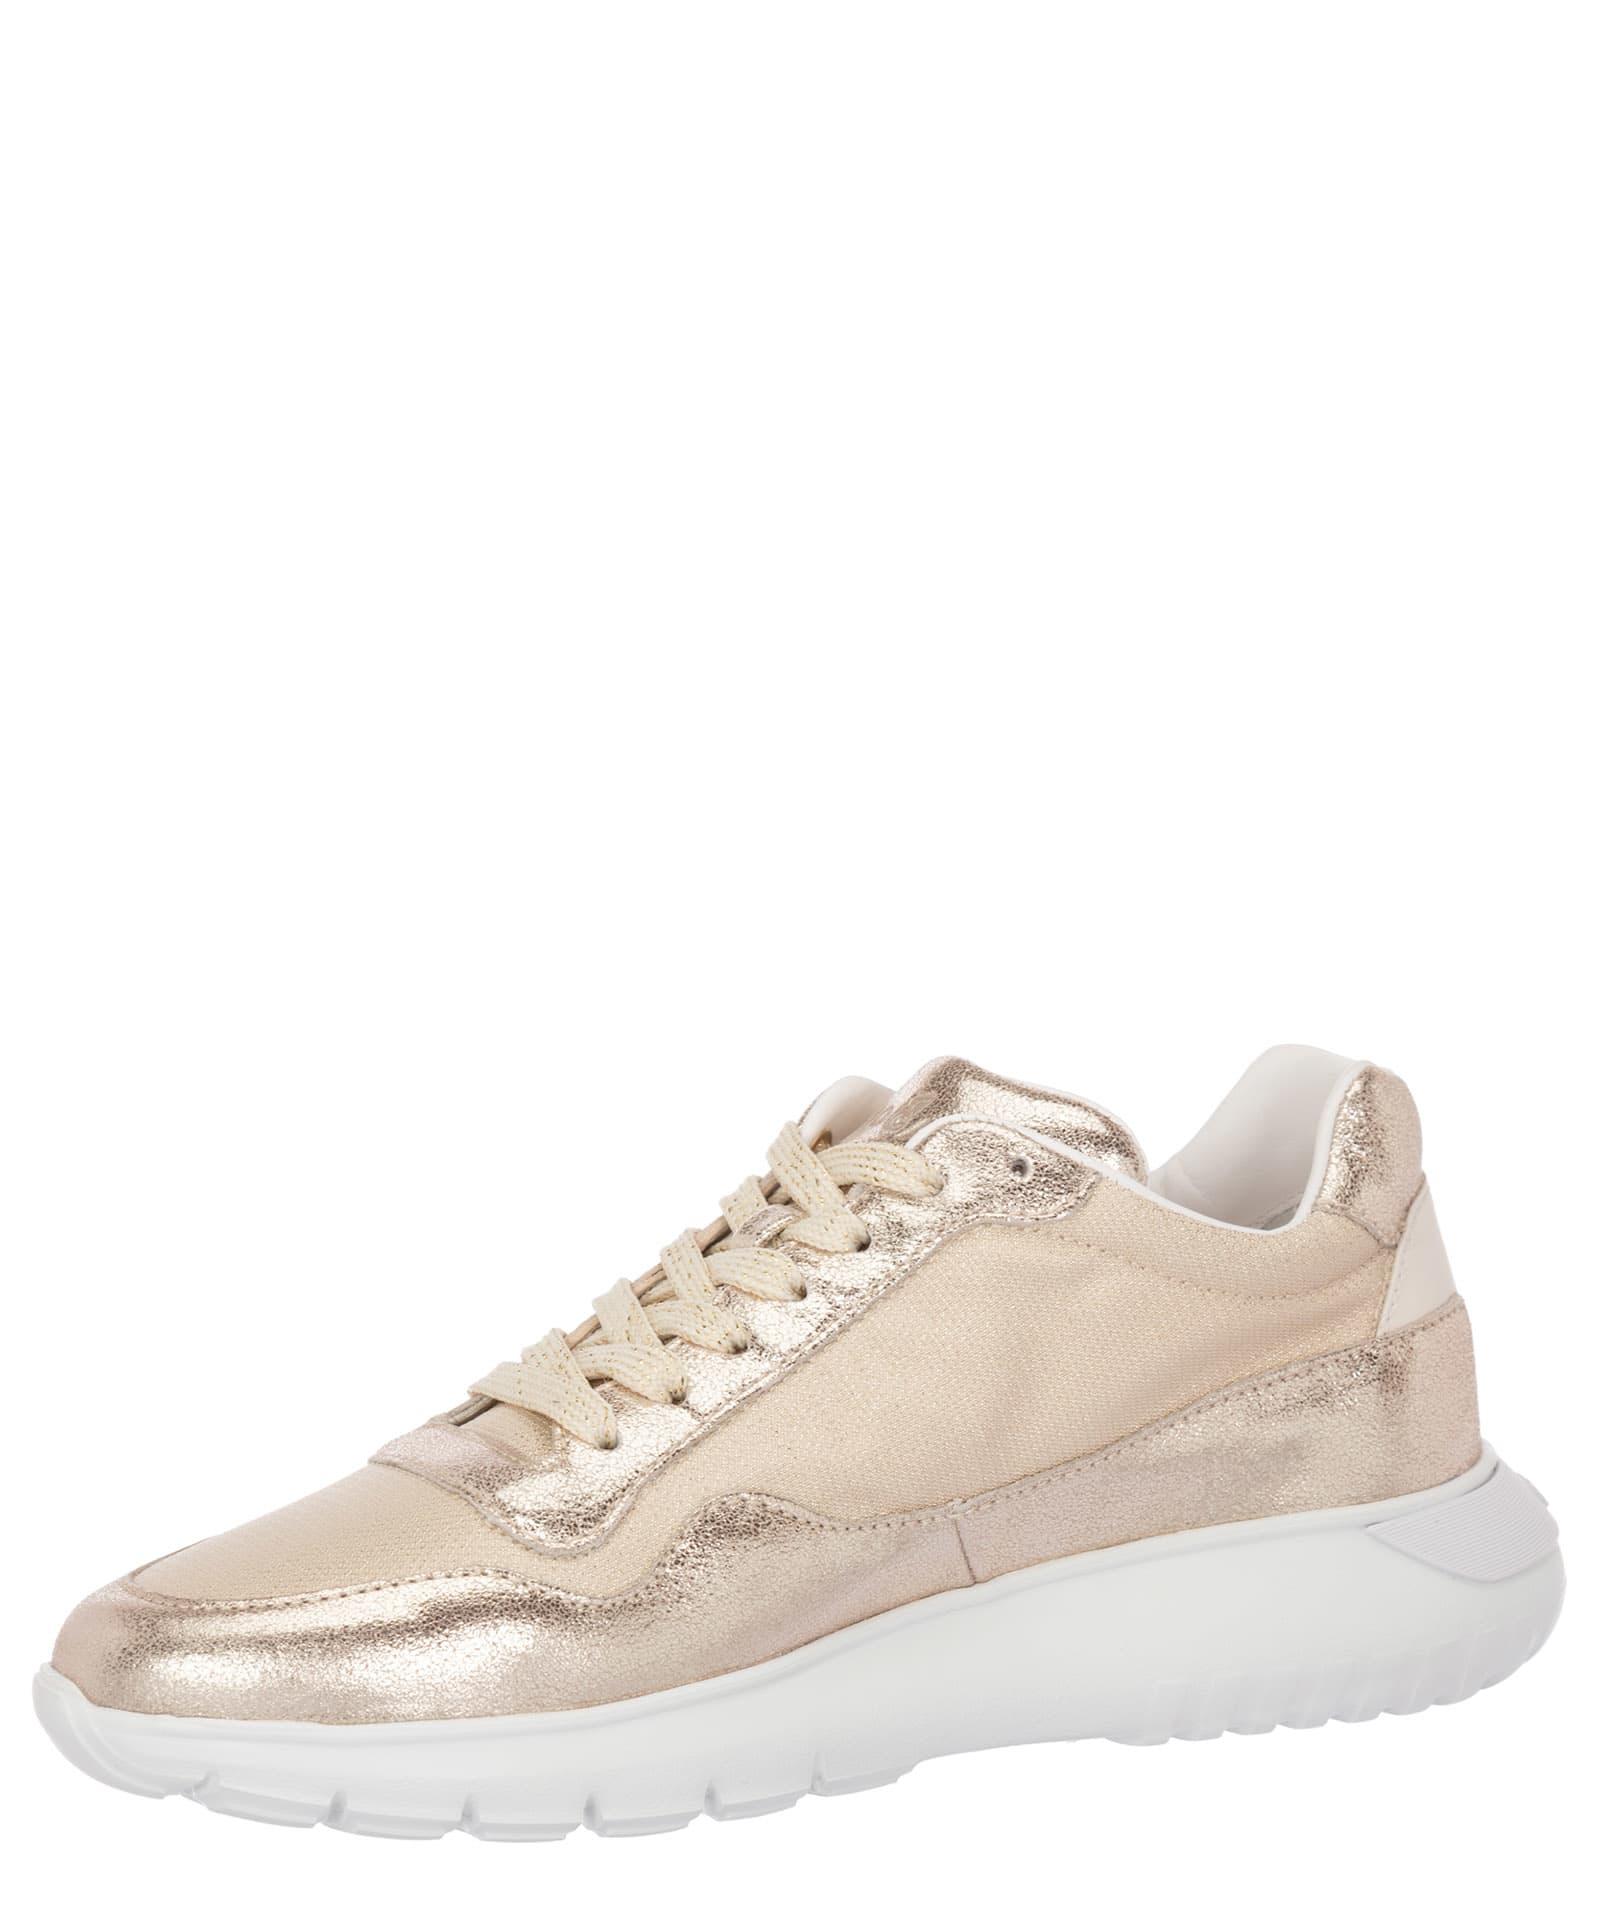 Hogan Leather Interactive3 Gold Sneakers in Natural - Save 40% | Lyst